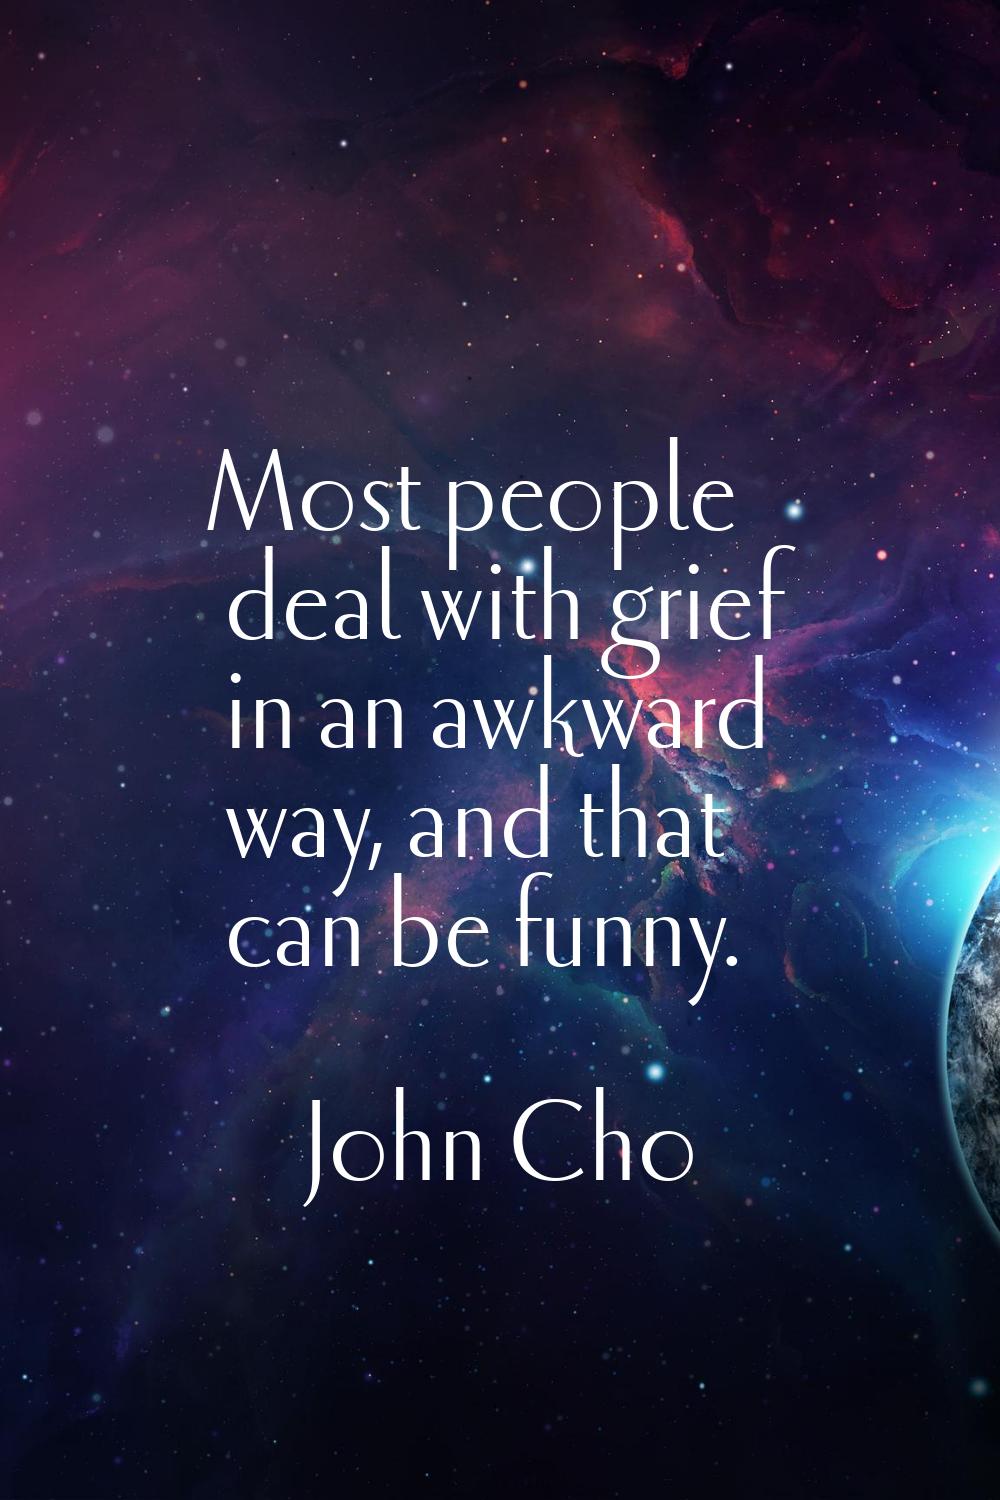 Most people deal with grief in an awkward way, and that can be funny.